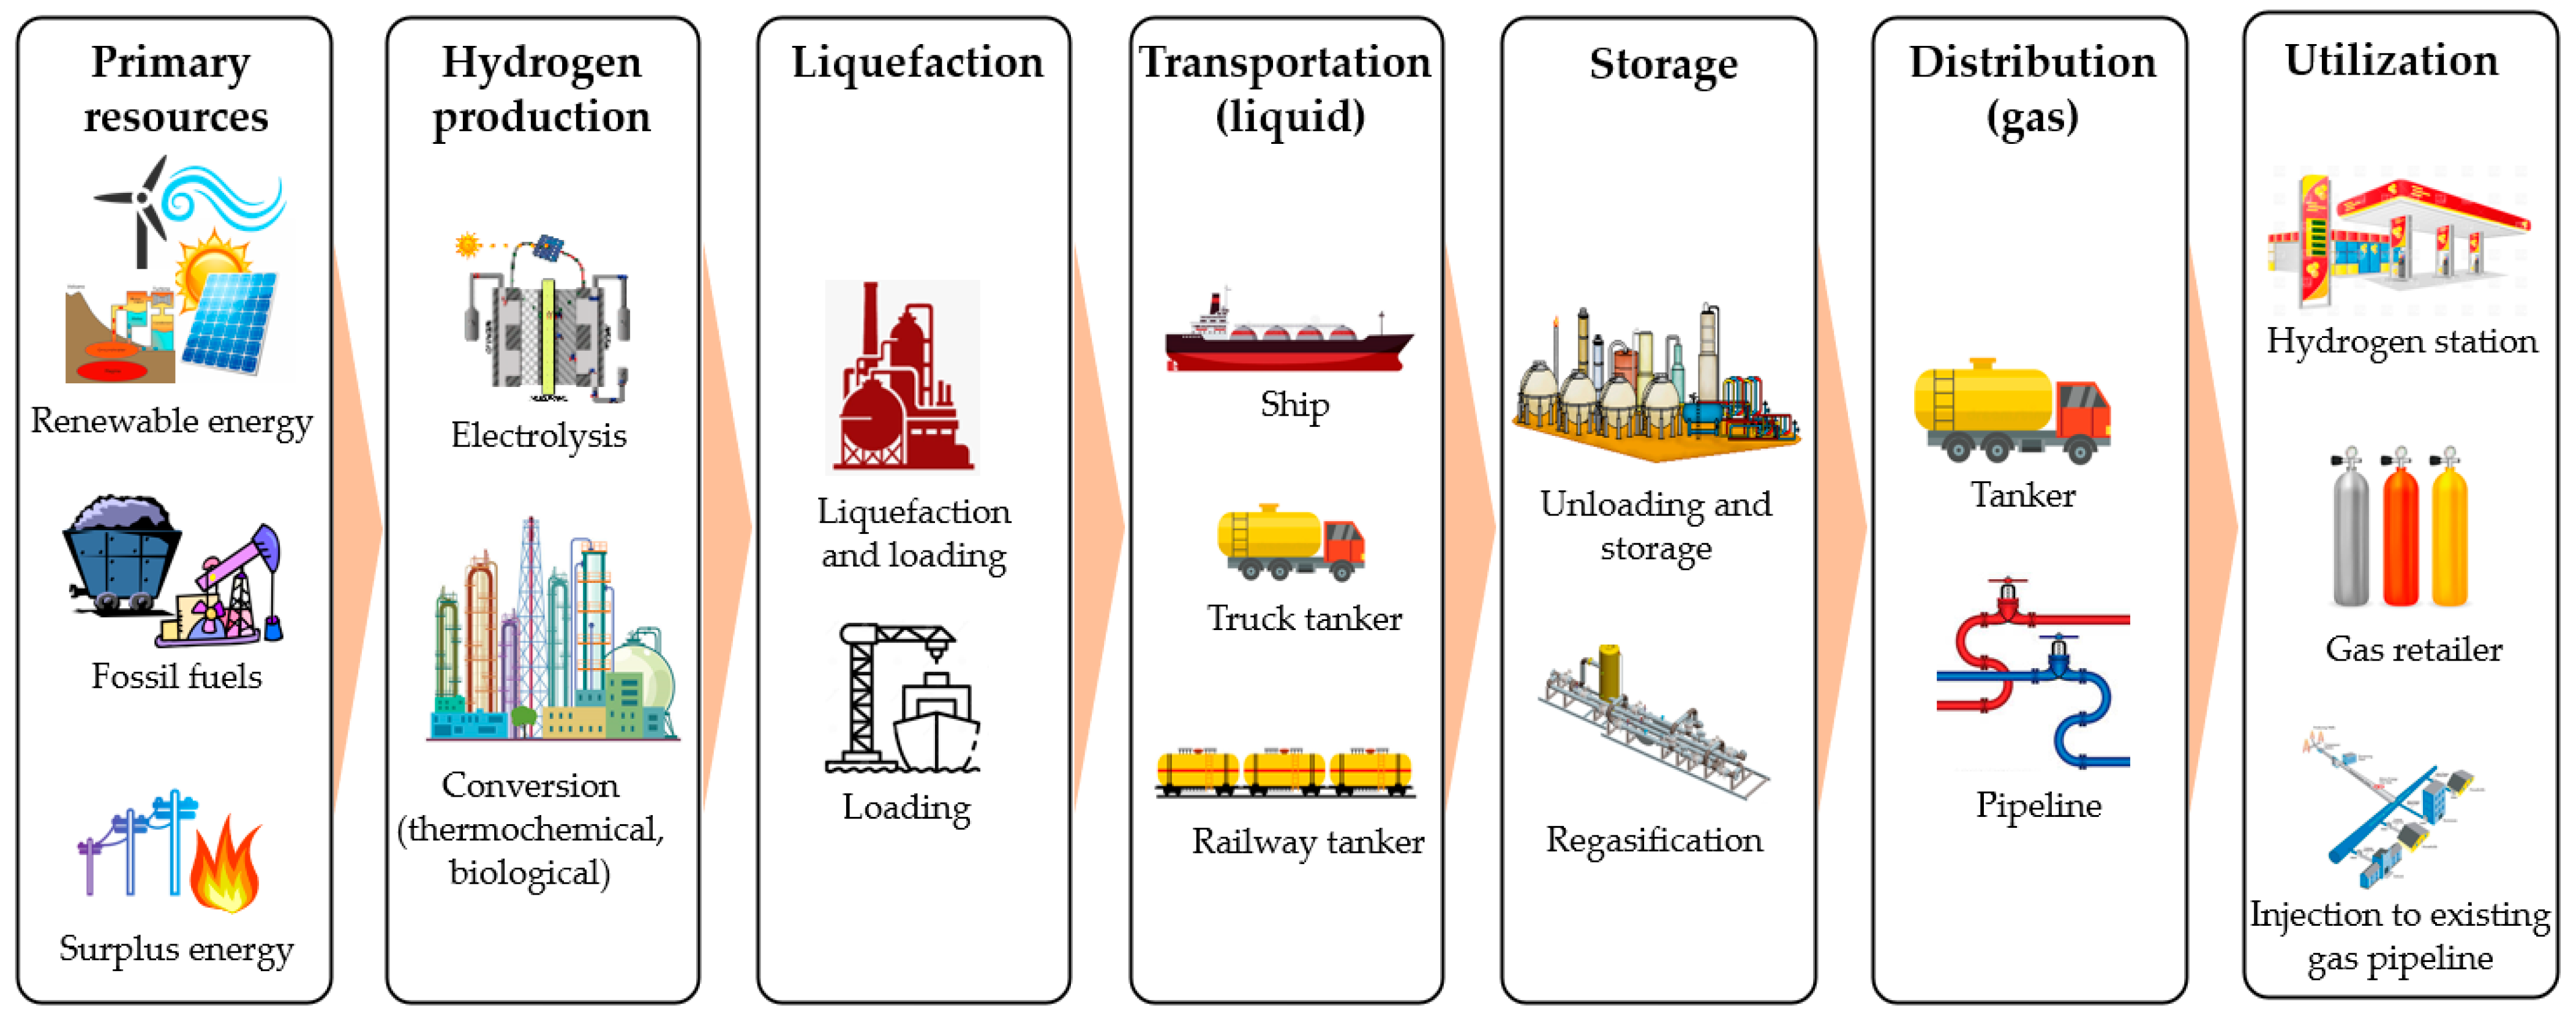 Energies | Free Full-Text | Liquid Hydrogen: A Review on Liquefaction,  Storage, Transportation, and Safety